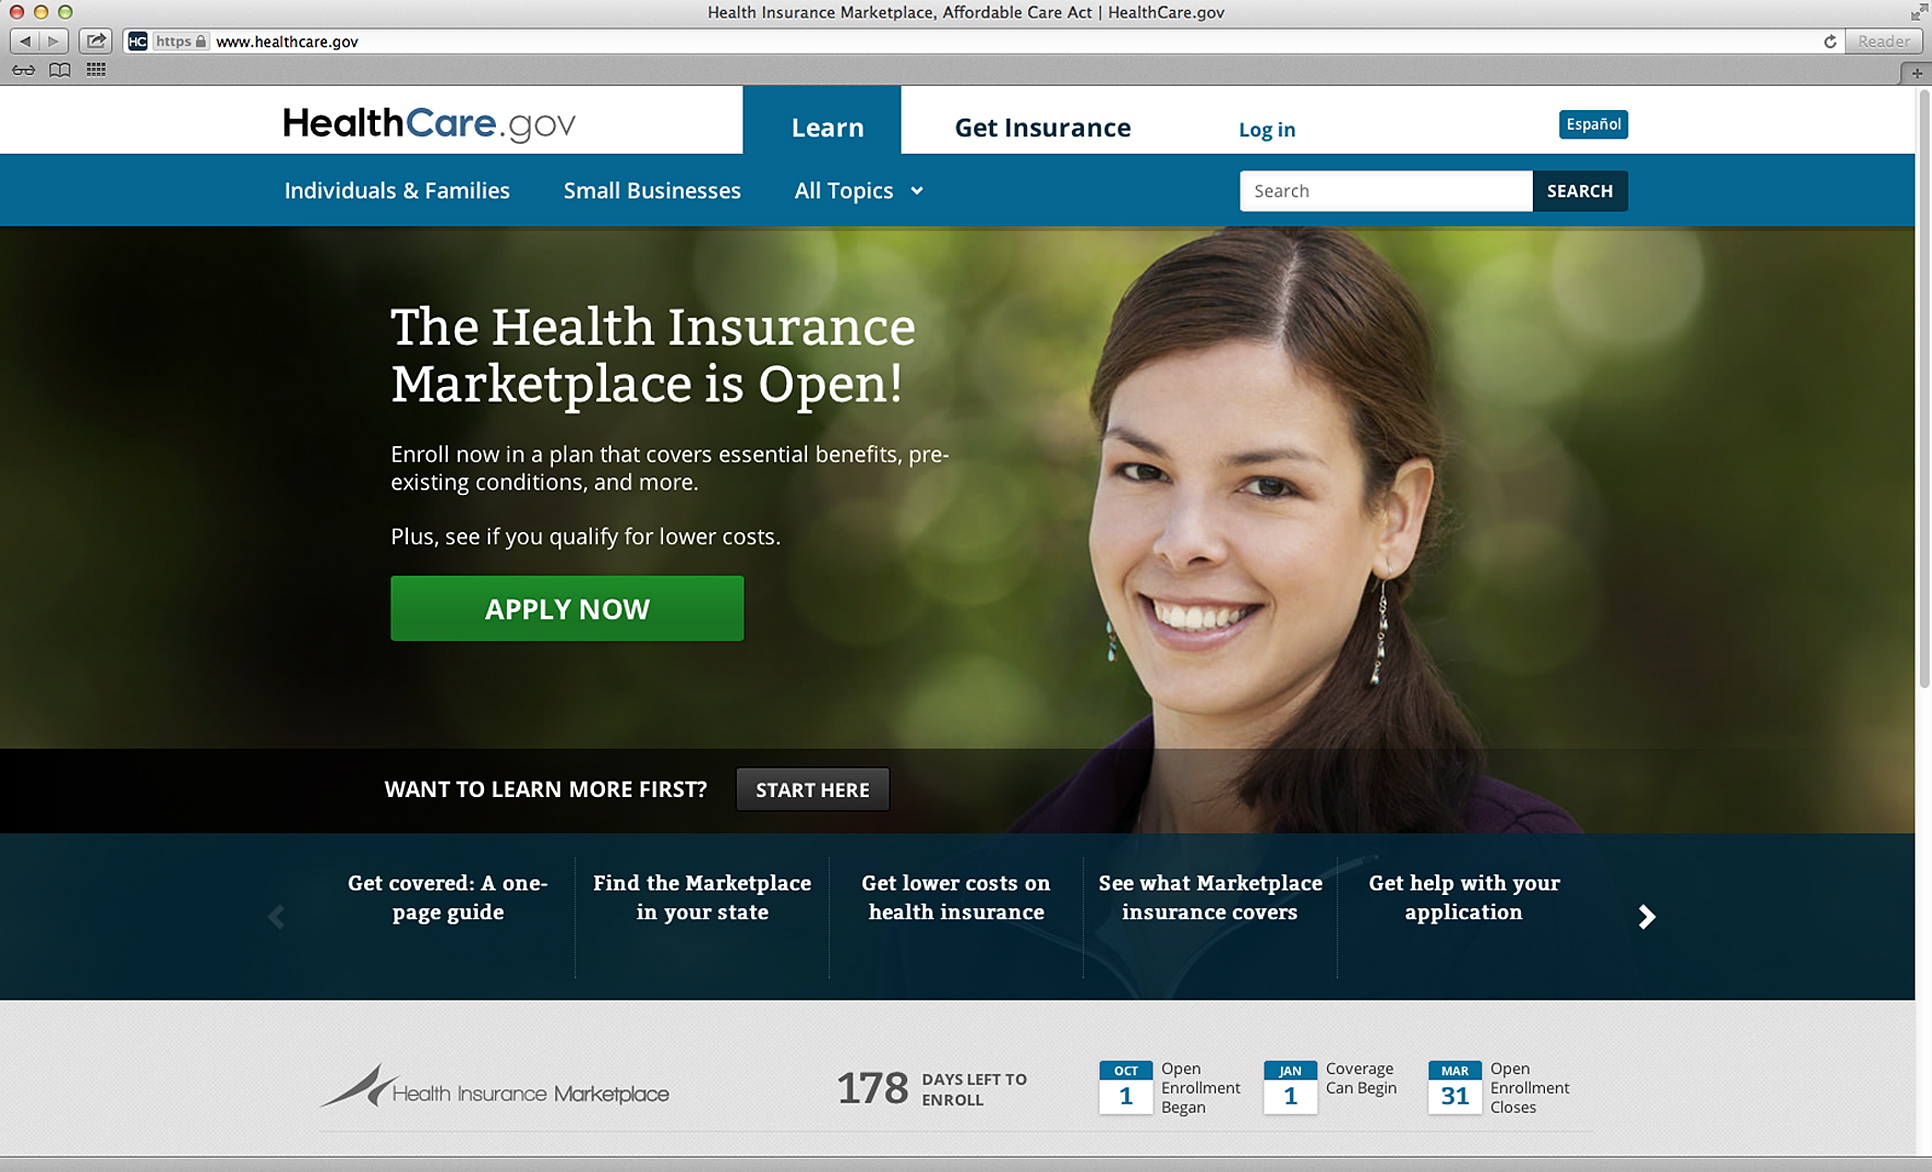 The main landing web page for HealthCare.gov.